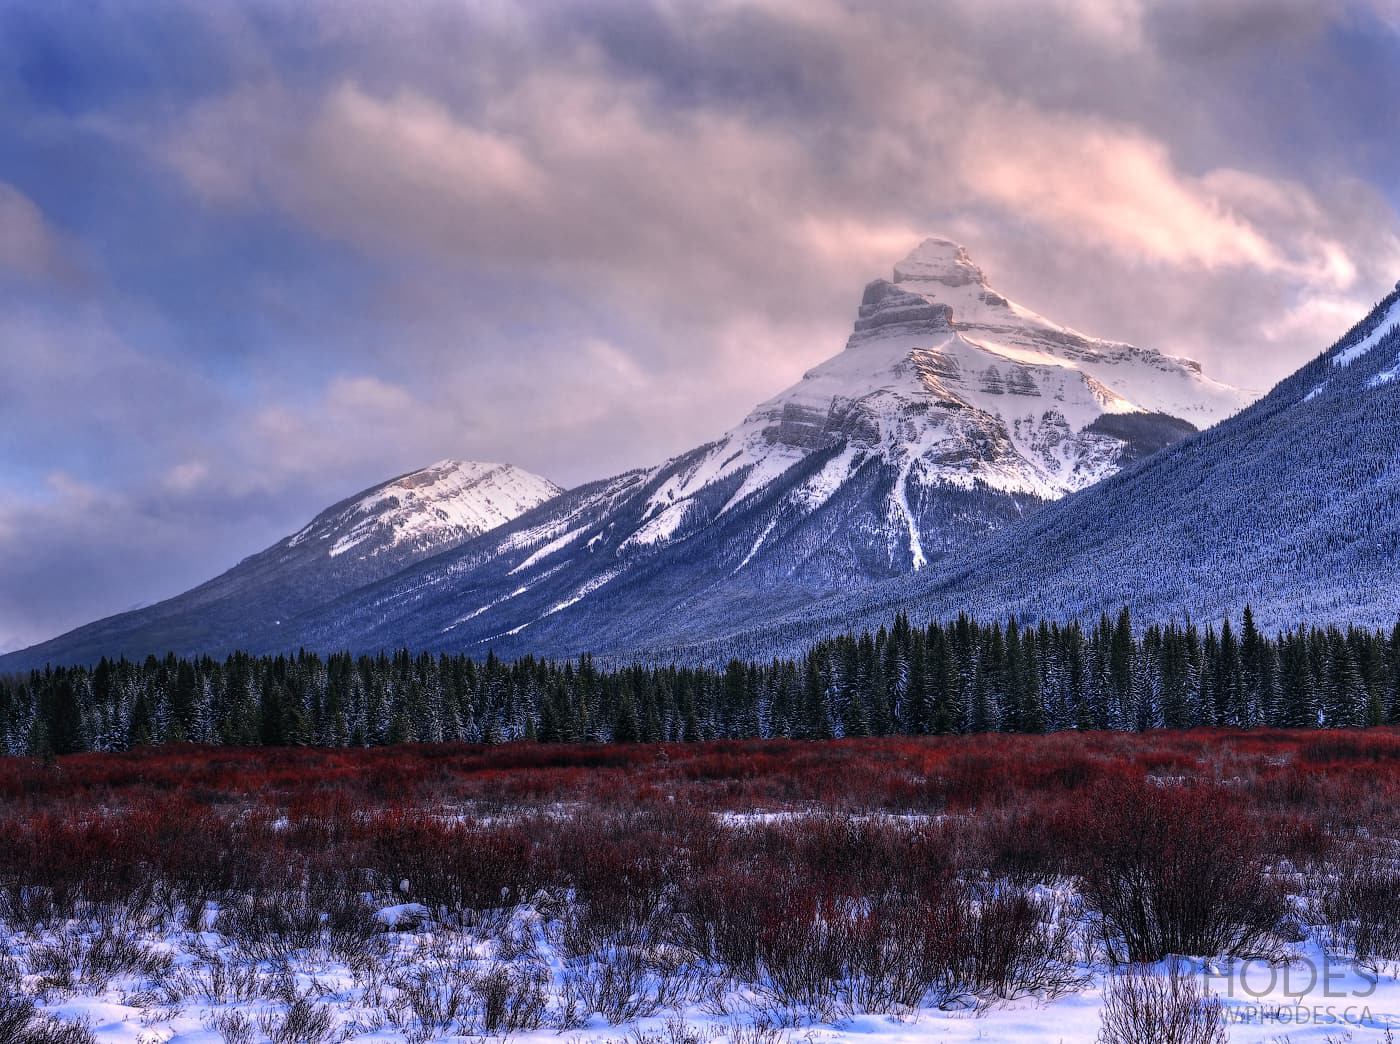 Landscape from Bow Valley Parkway in winter